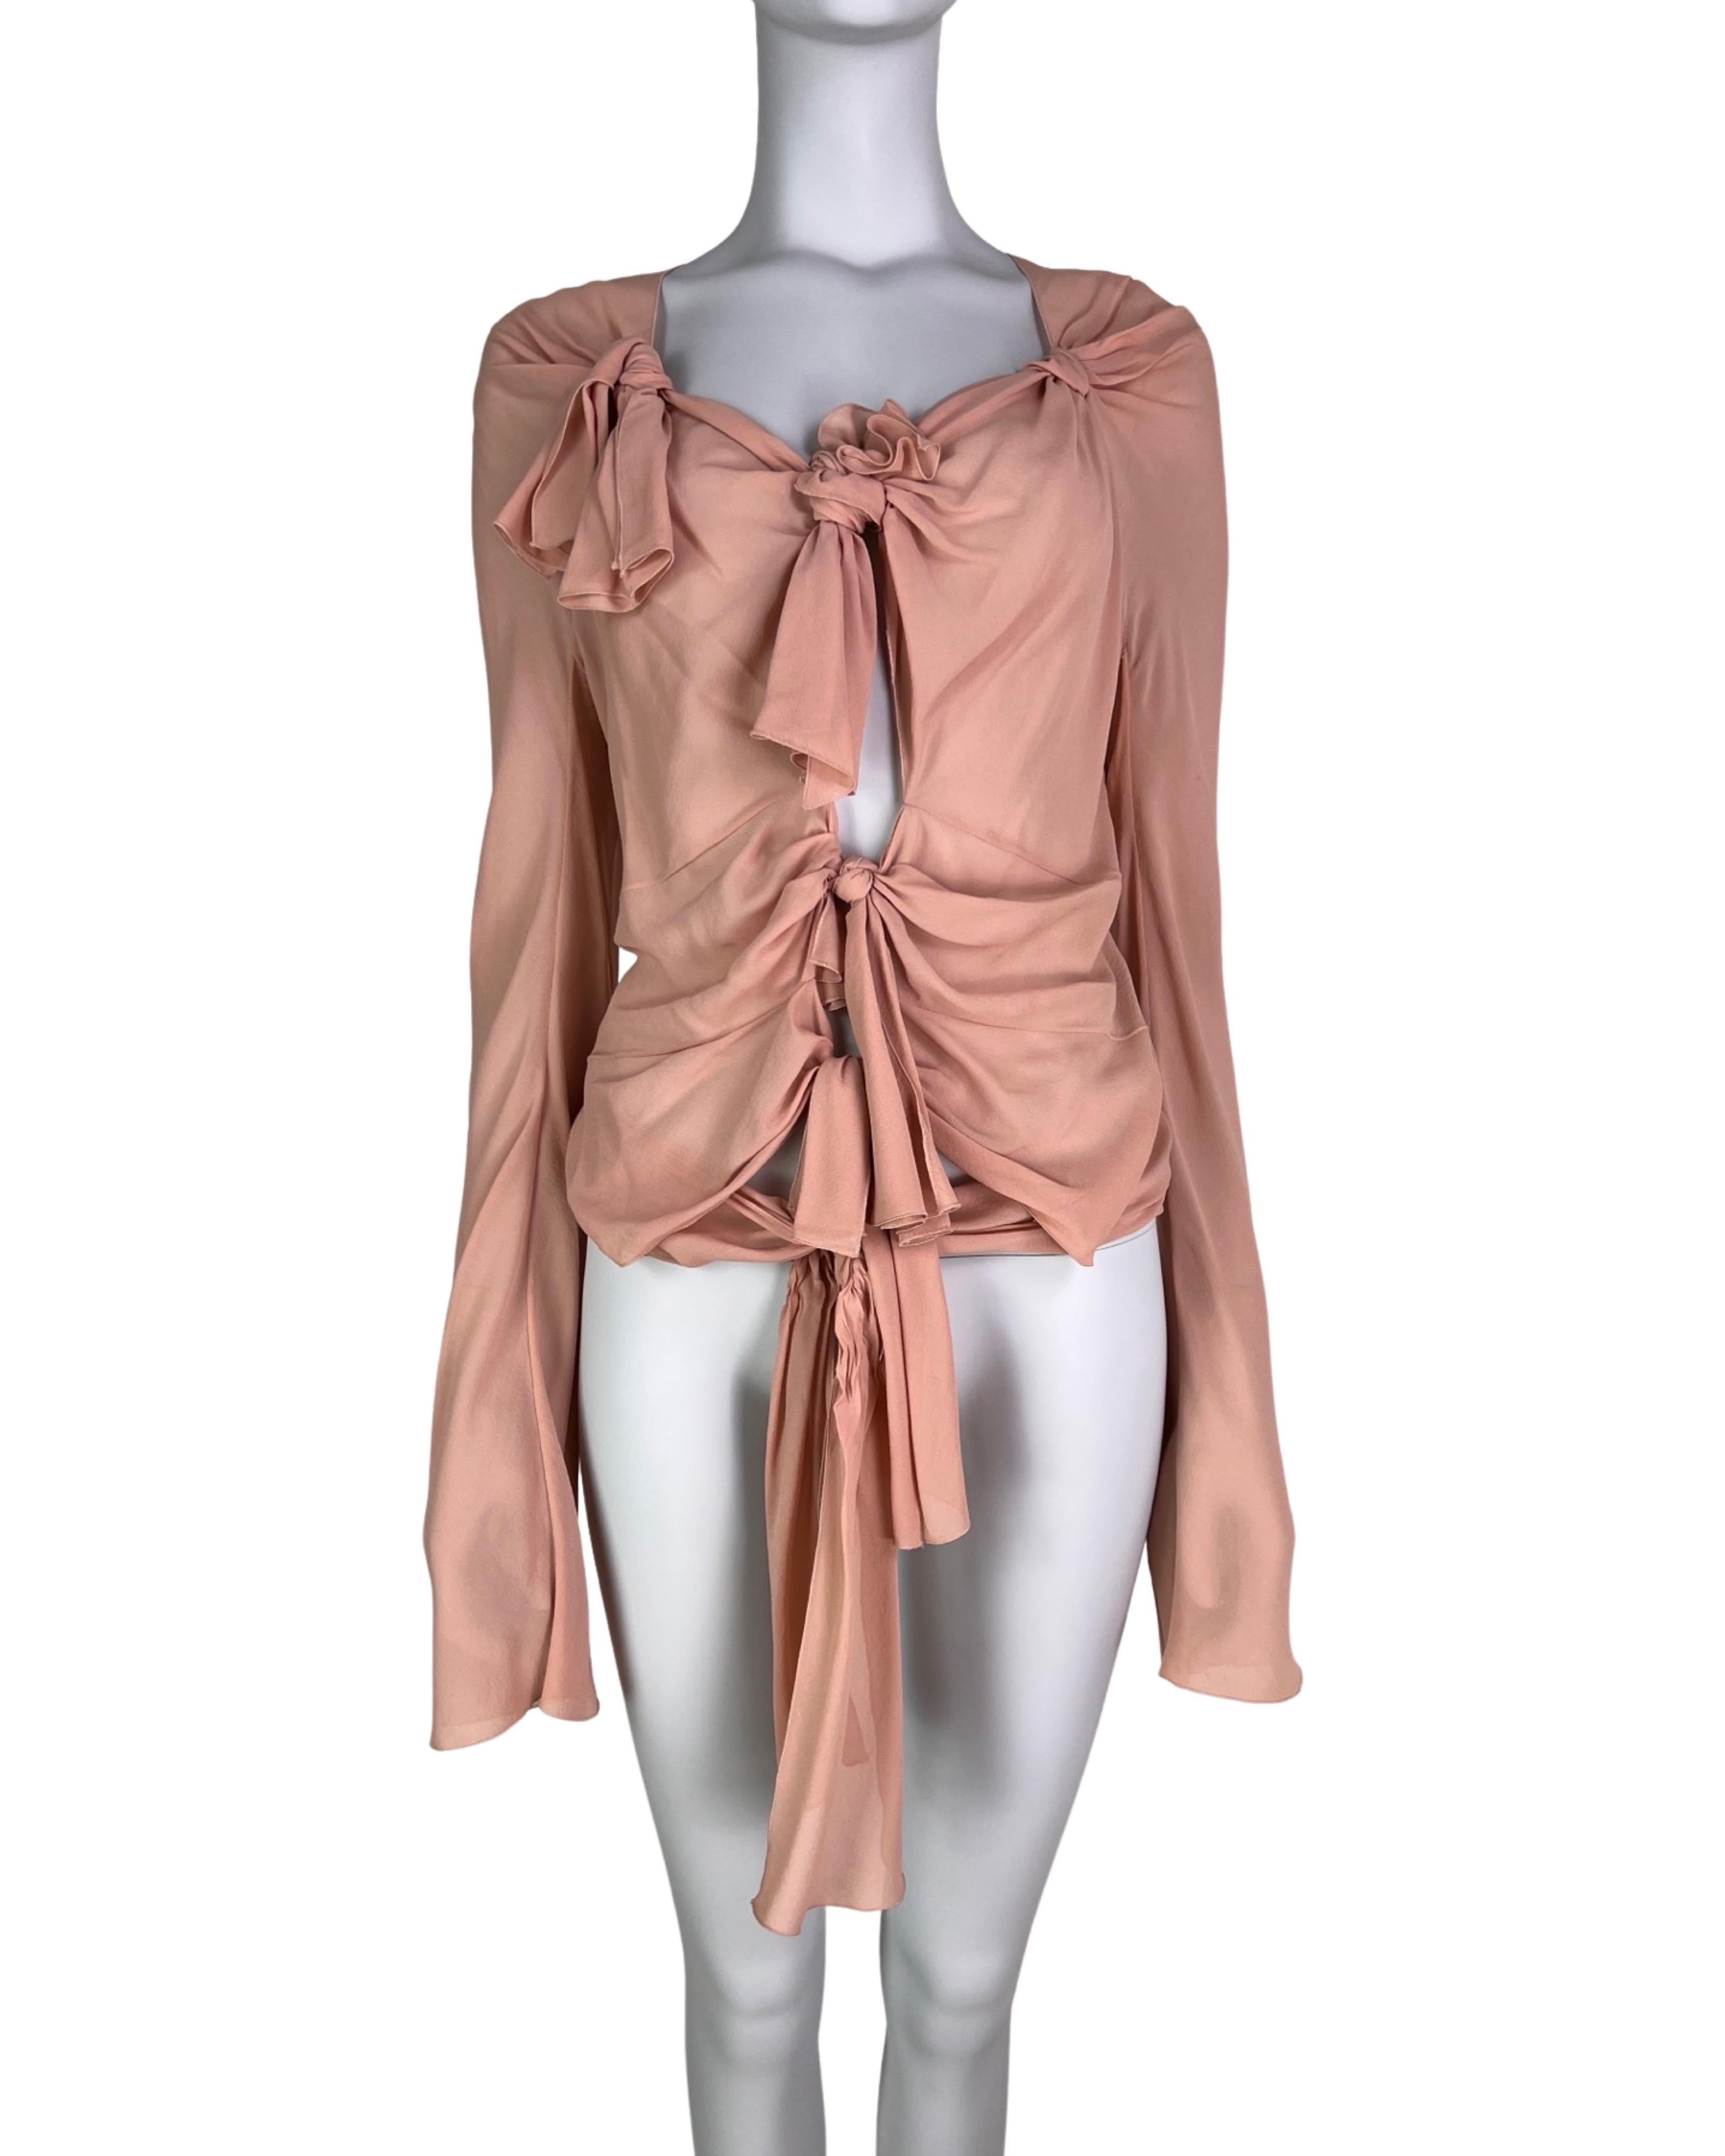 Dior by John Galliano Spring 2003 SIlk Blouse For Sale 1